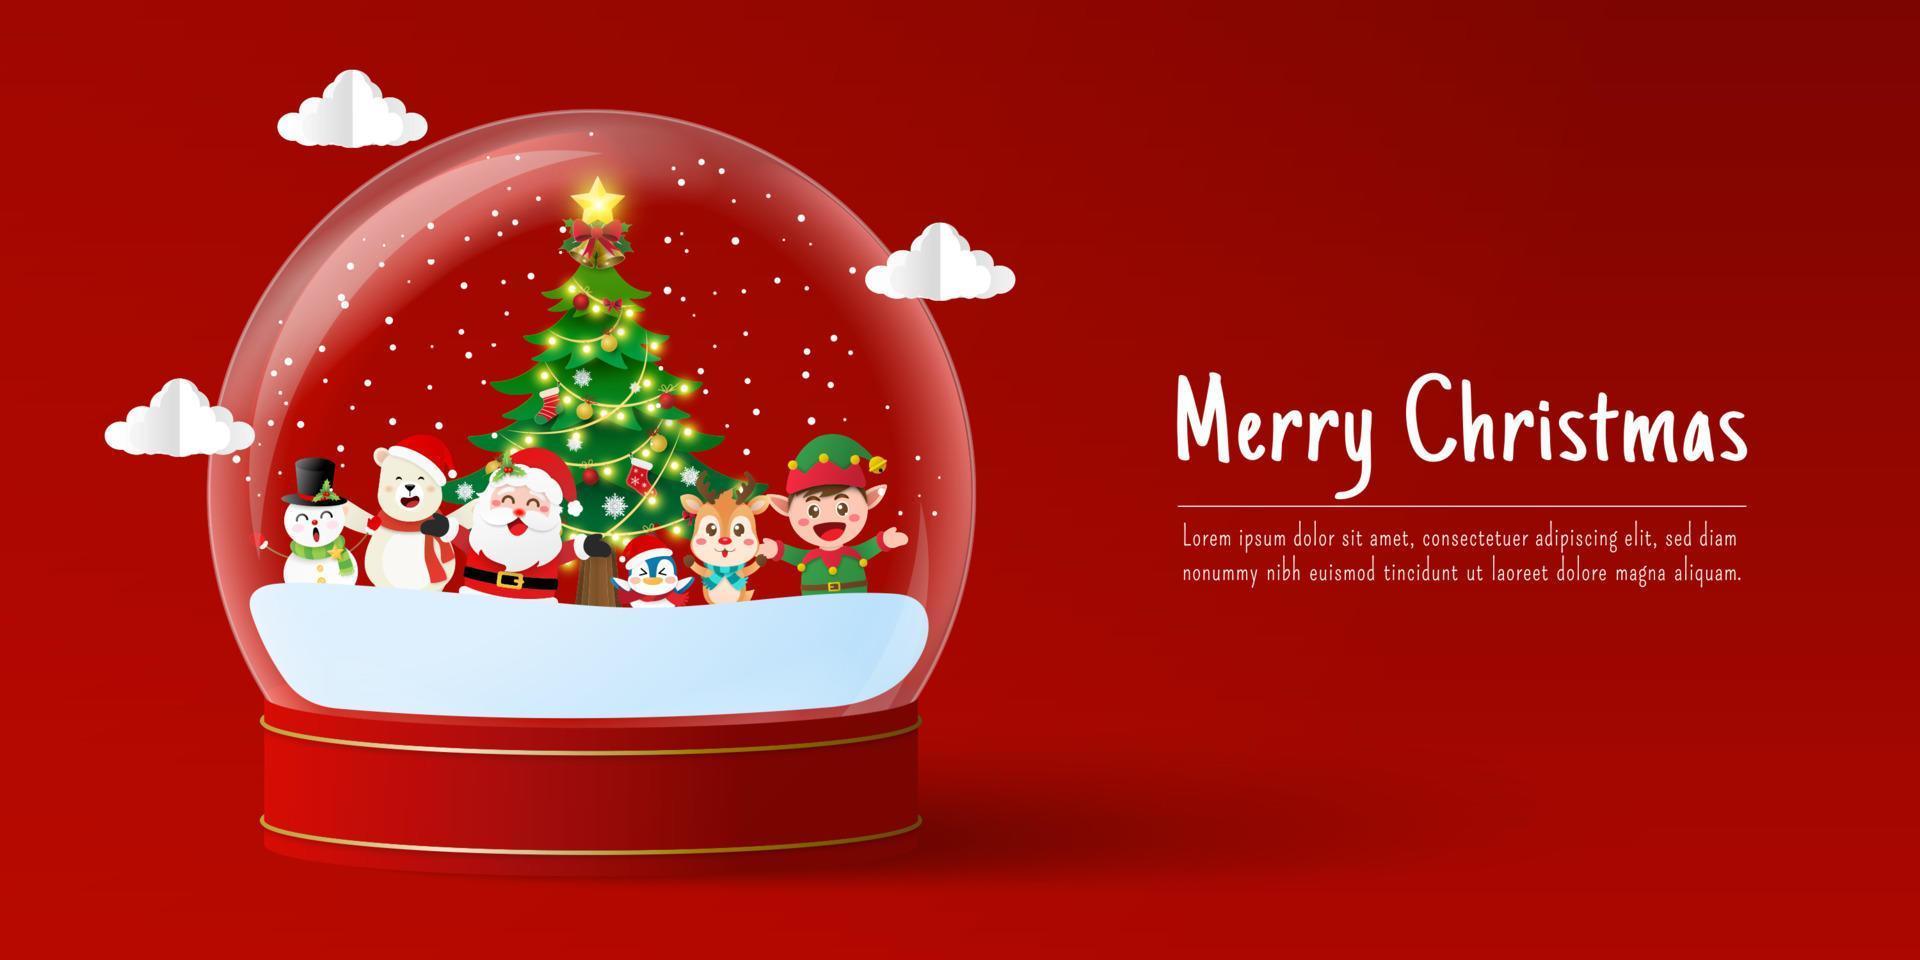 Christmas banner of Santa Claus and friend in snow globe